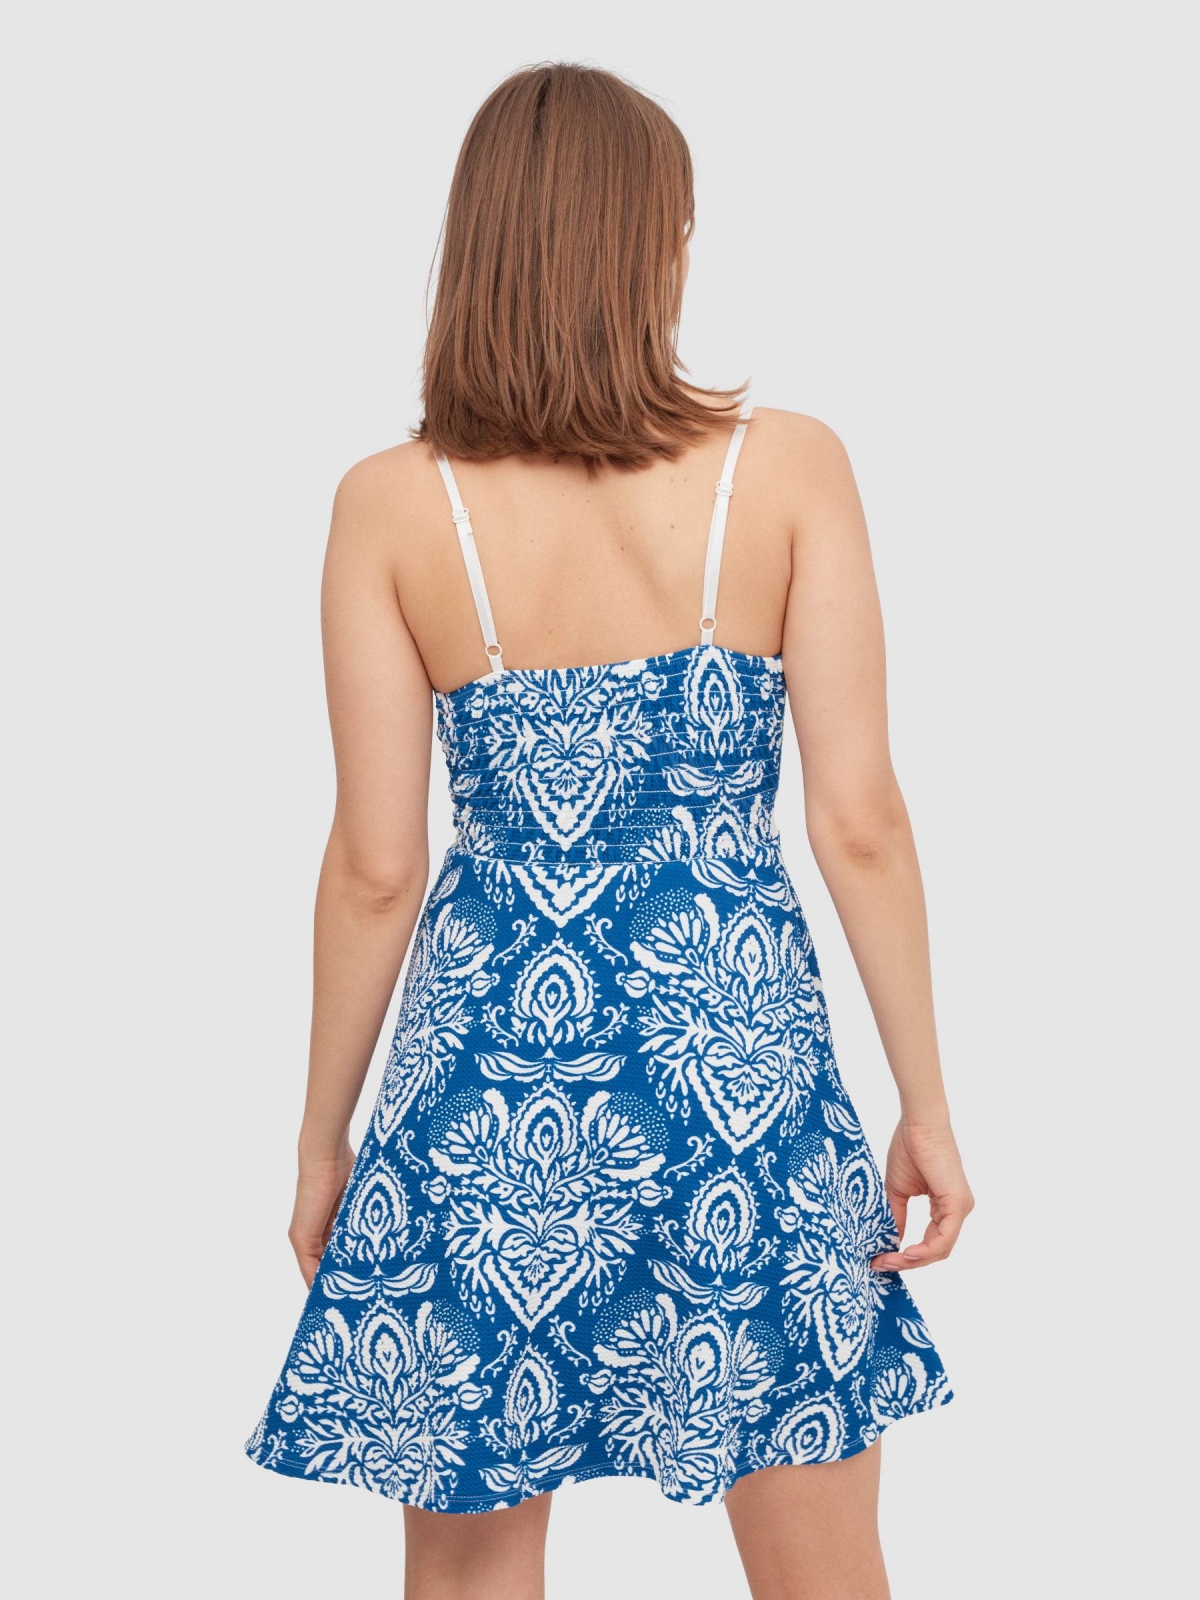 Printed flight dress blue middle back view